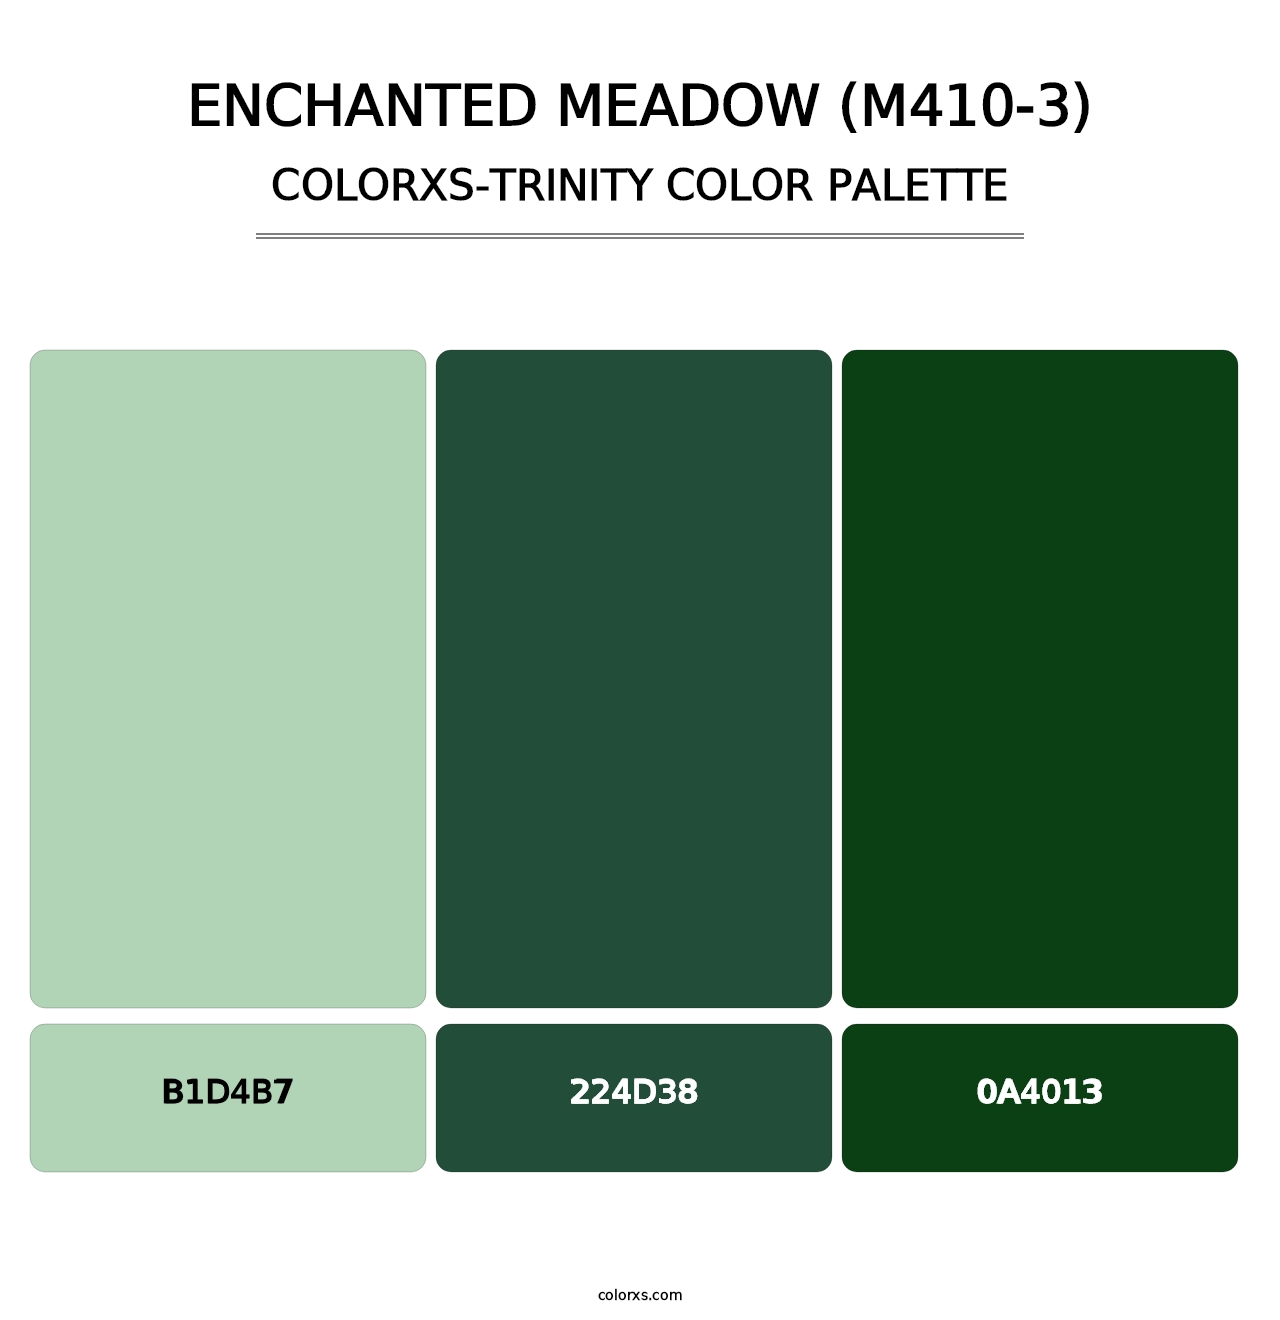 Enchanted Meadow (M410-3) - Colorxs Trinity Palette